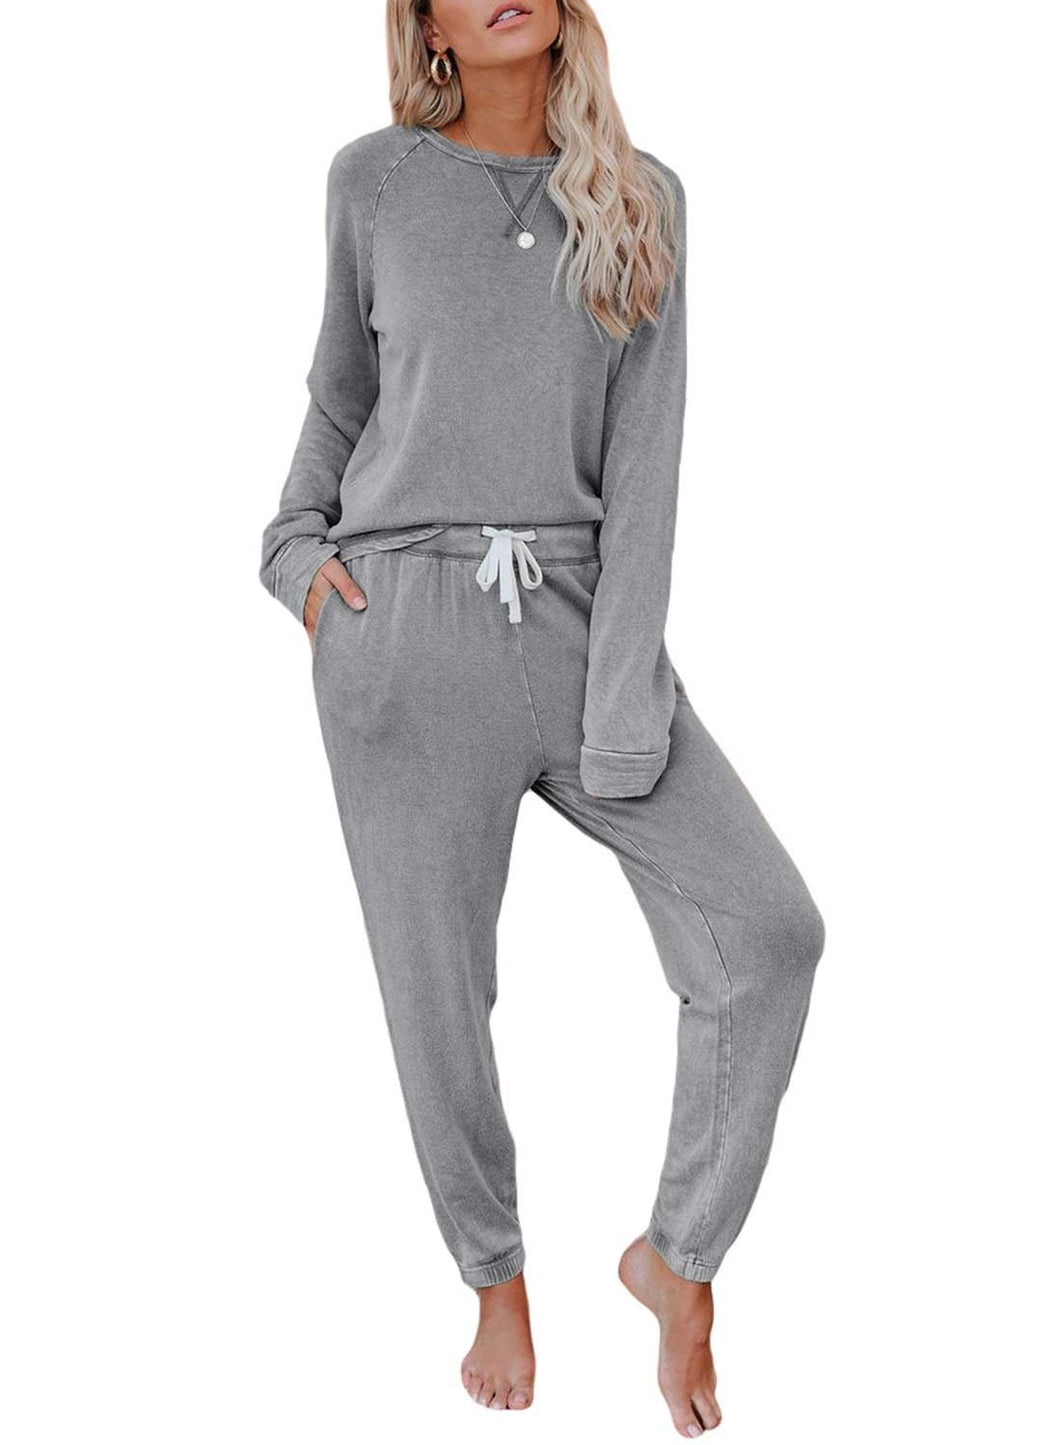 Two-piece Home Casual Long-sleeved T-shirt Suit